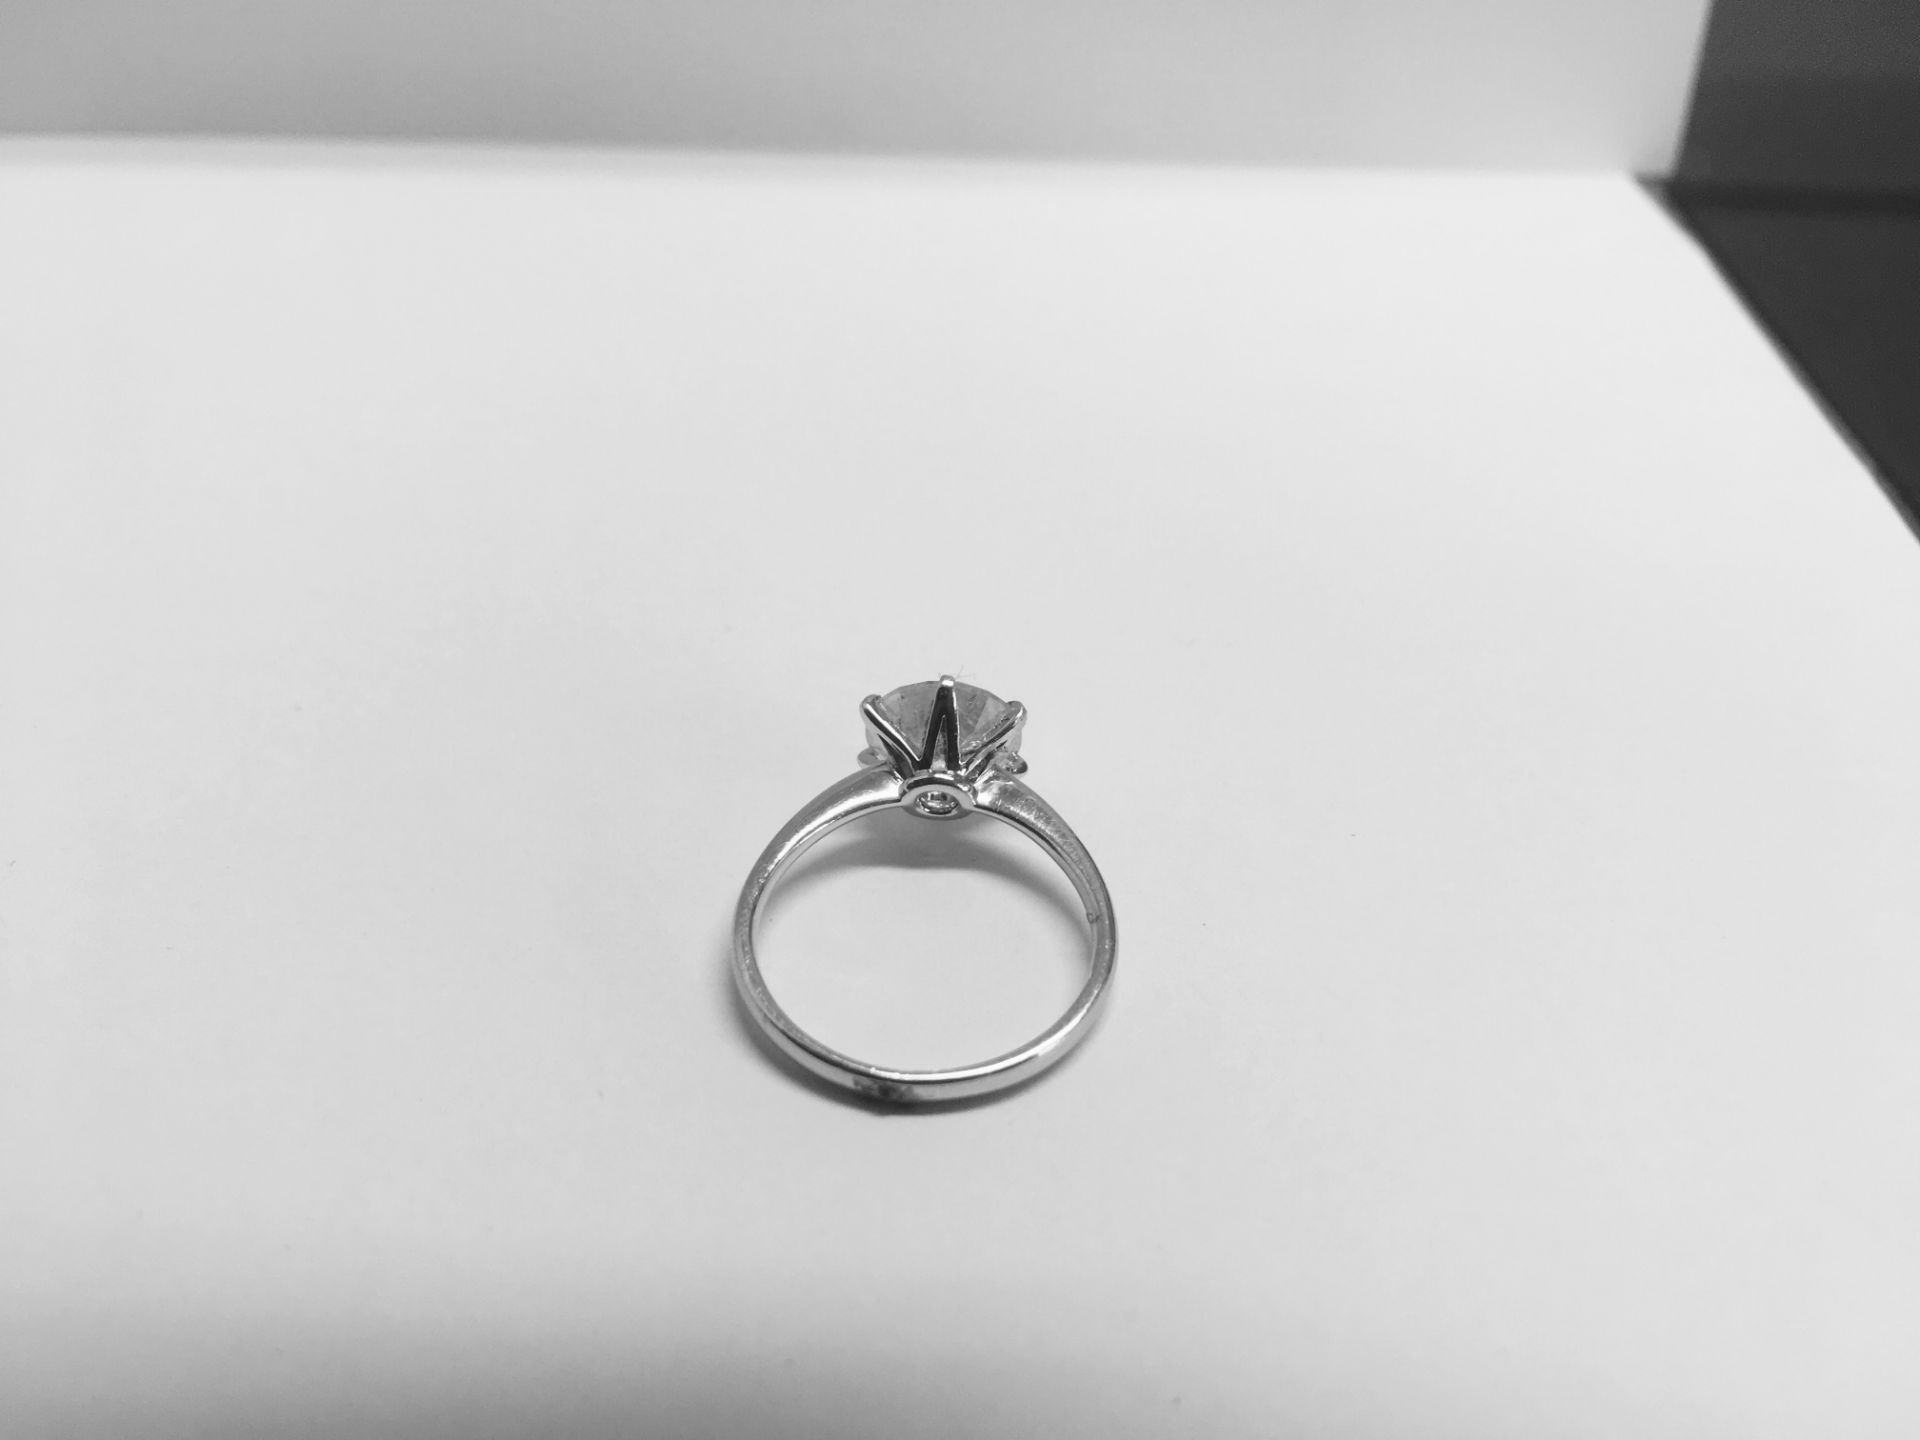 2.70ct diamond solitaire ring,h colour i1 quality (enhanced by laser drilling) diamond,5gms platinum - Image 5 of 7